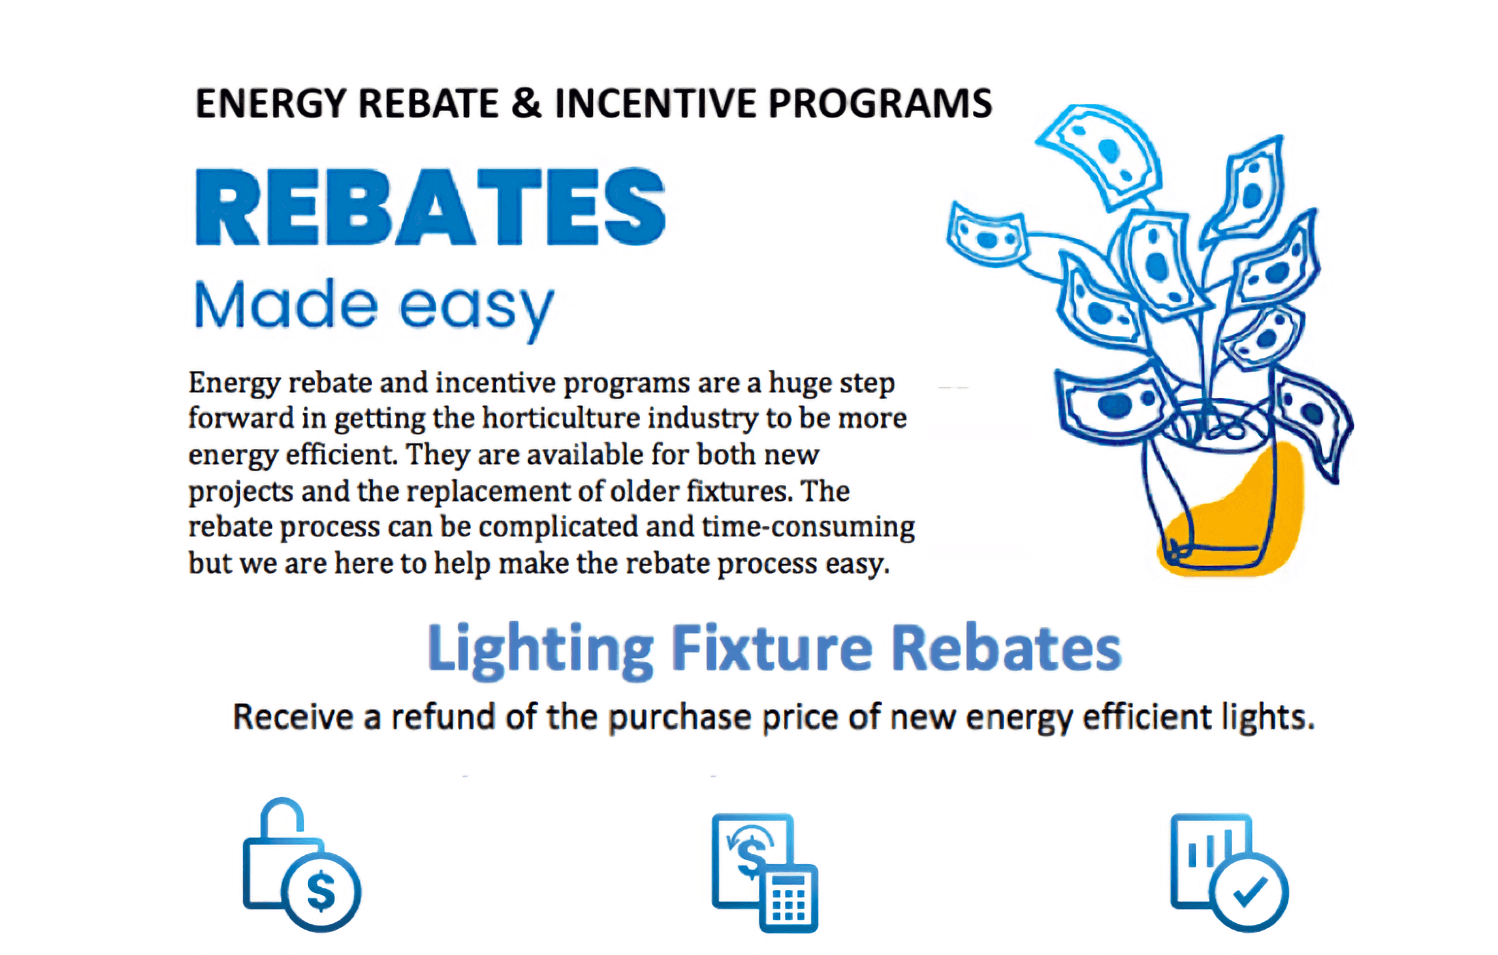 Energy Rebate & Incentive Prpgrams for the Horticulture Industry.  What Rebates.  LED Grow Lights, Dehumidifiers, HVAC Systems.  Horticulture Lighting Rebates